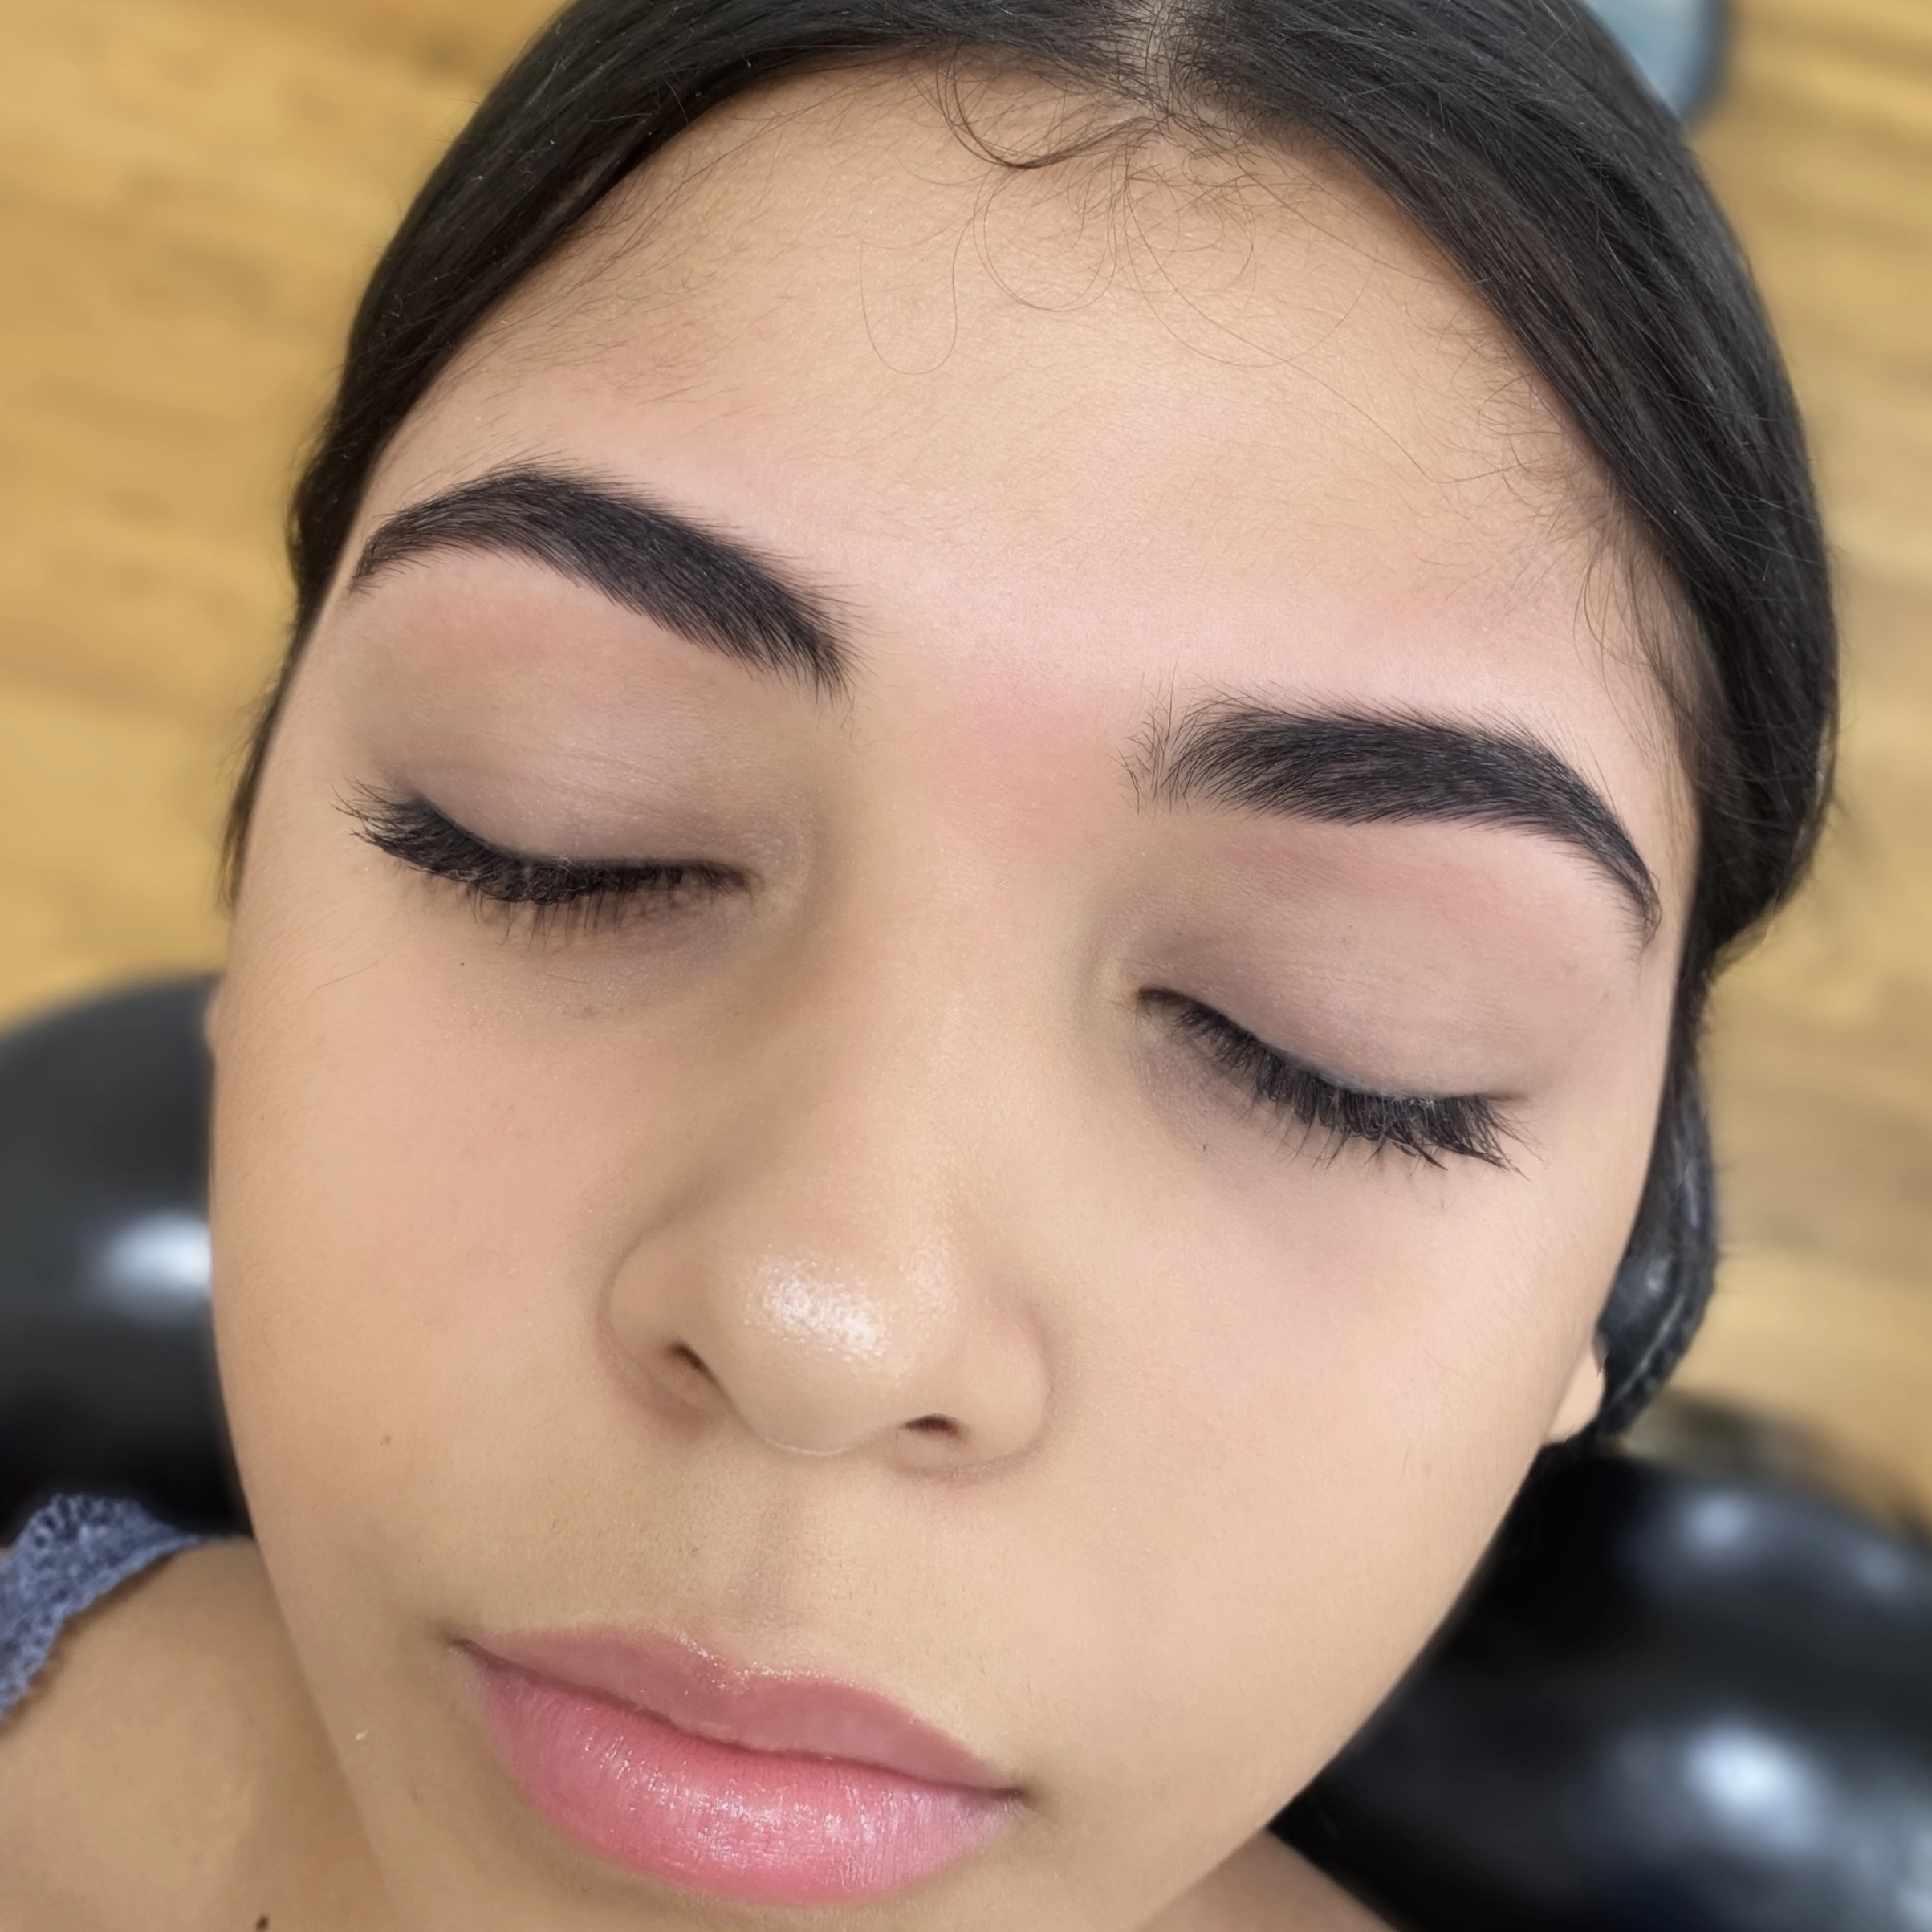 Why You Should Consider Threading Your Eyebrows - What Is Eyebrow Threading